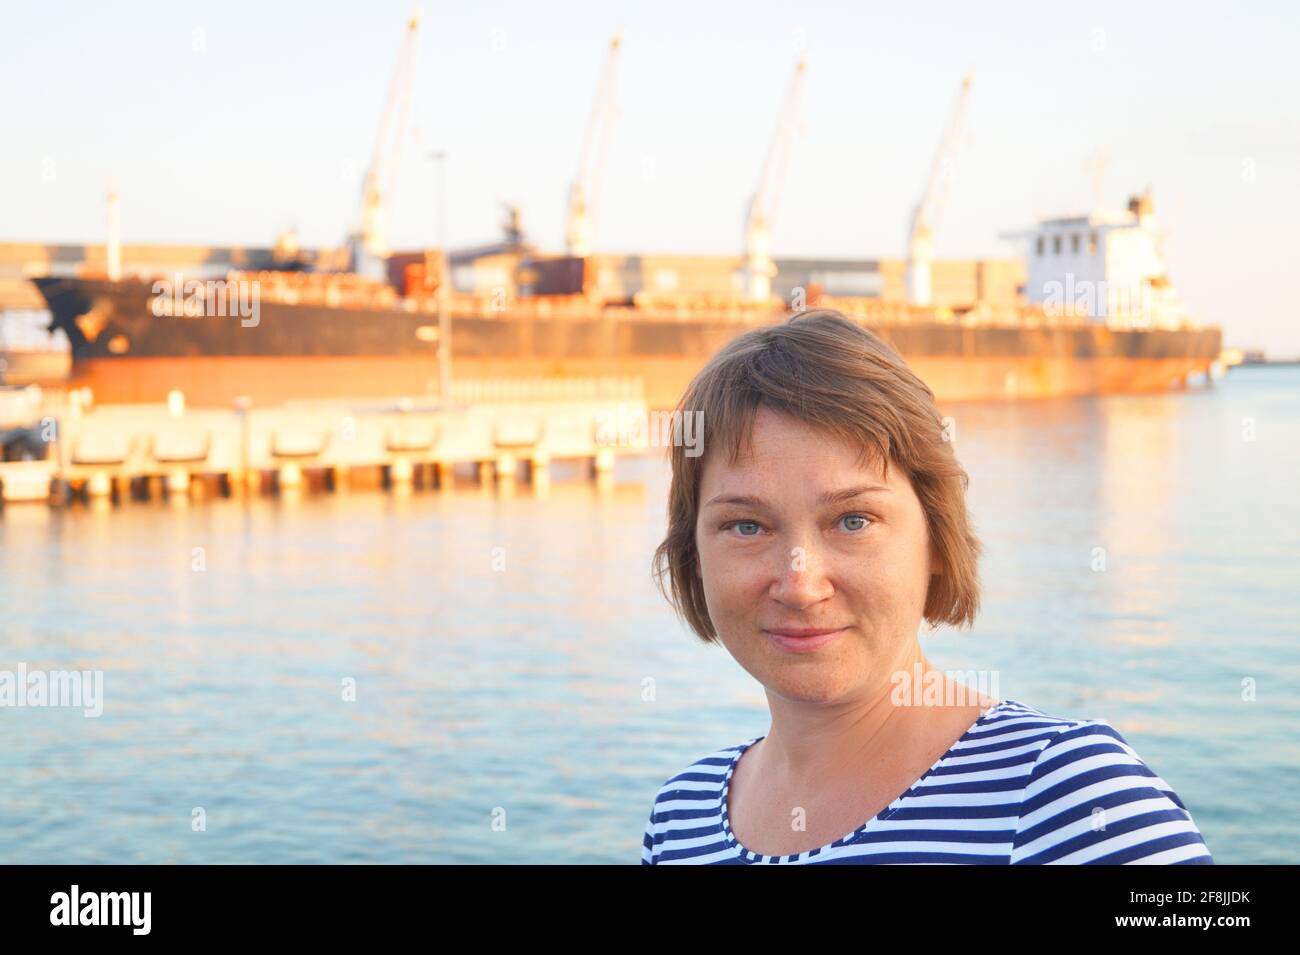 A woman stands in front of a loading trawler Stock Photo